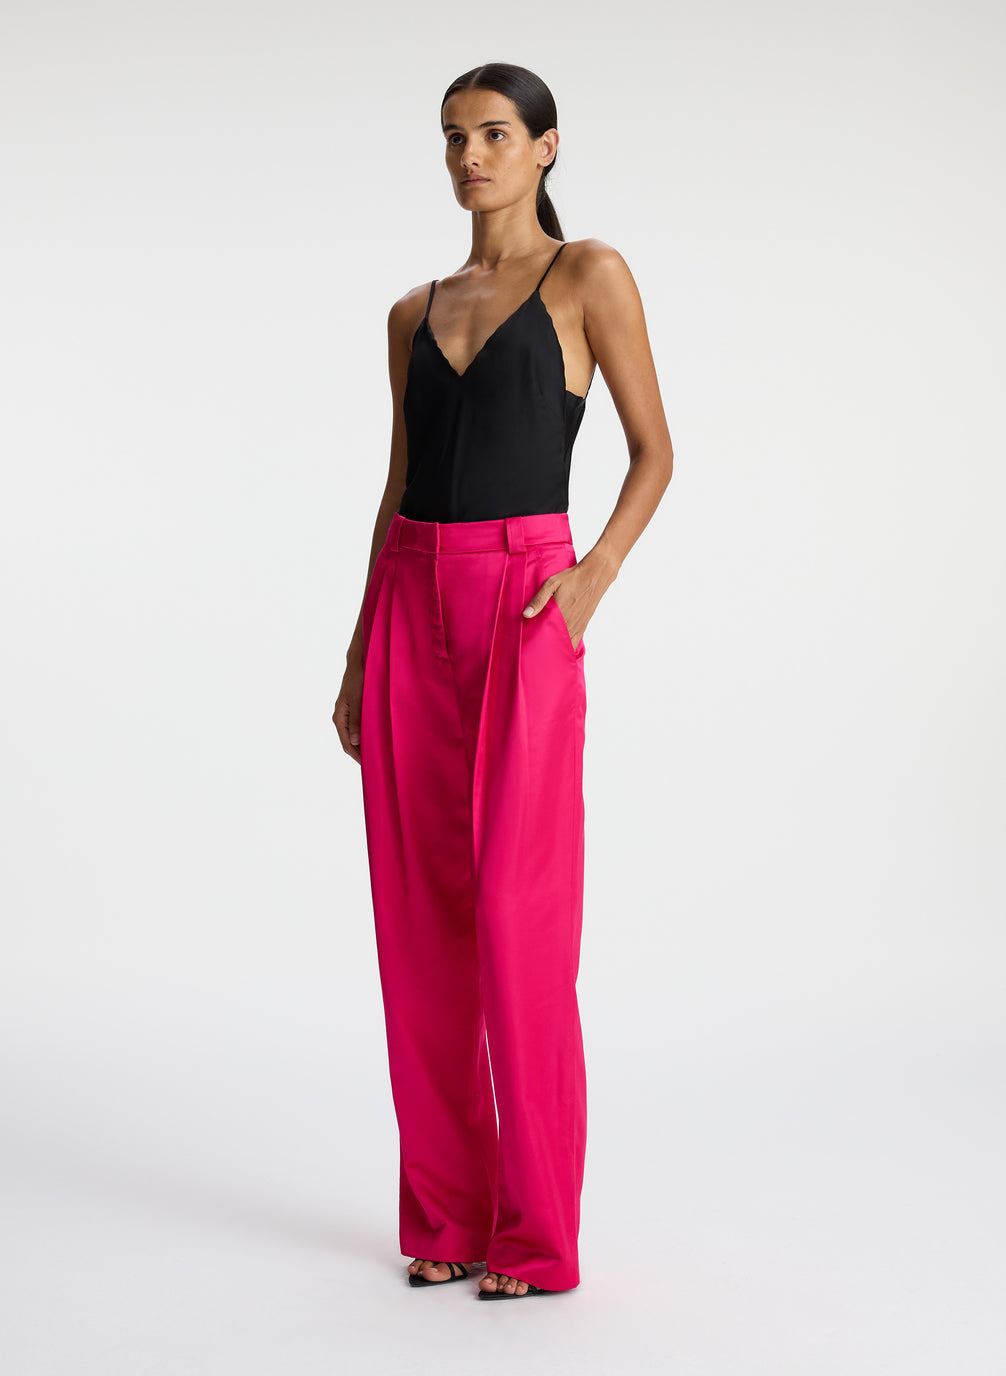 side view of woman wearing black satin camisole with bright pink satin pants